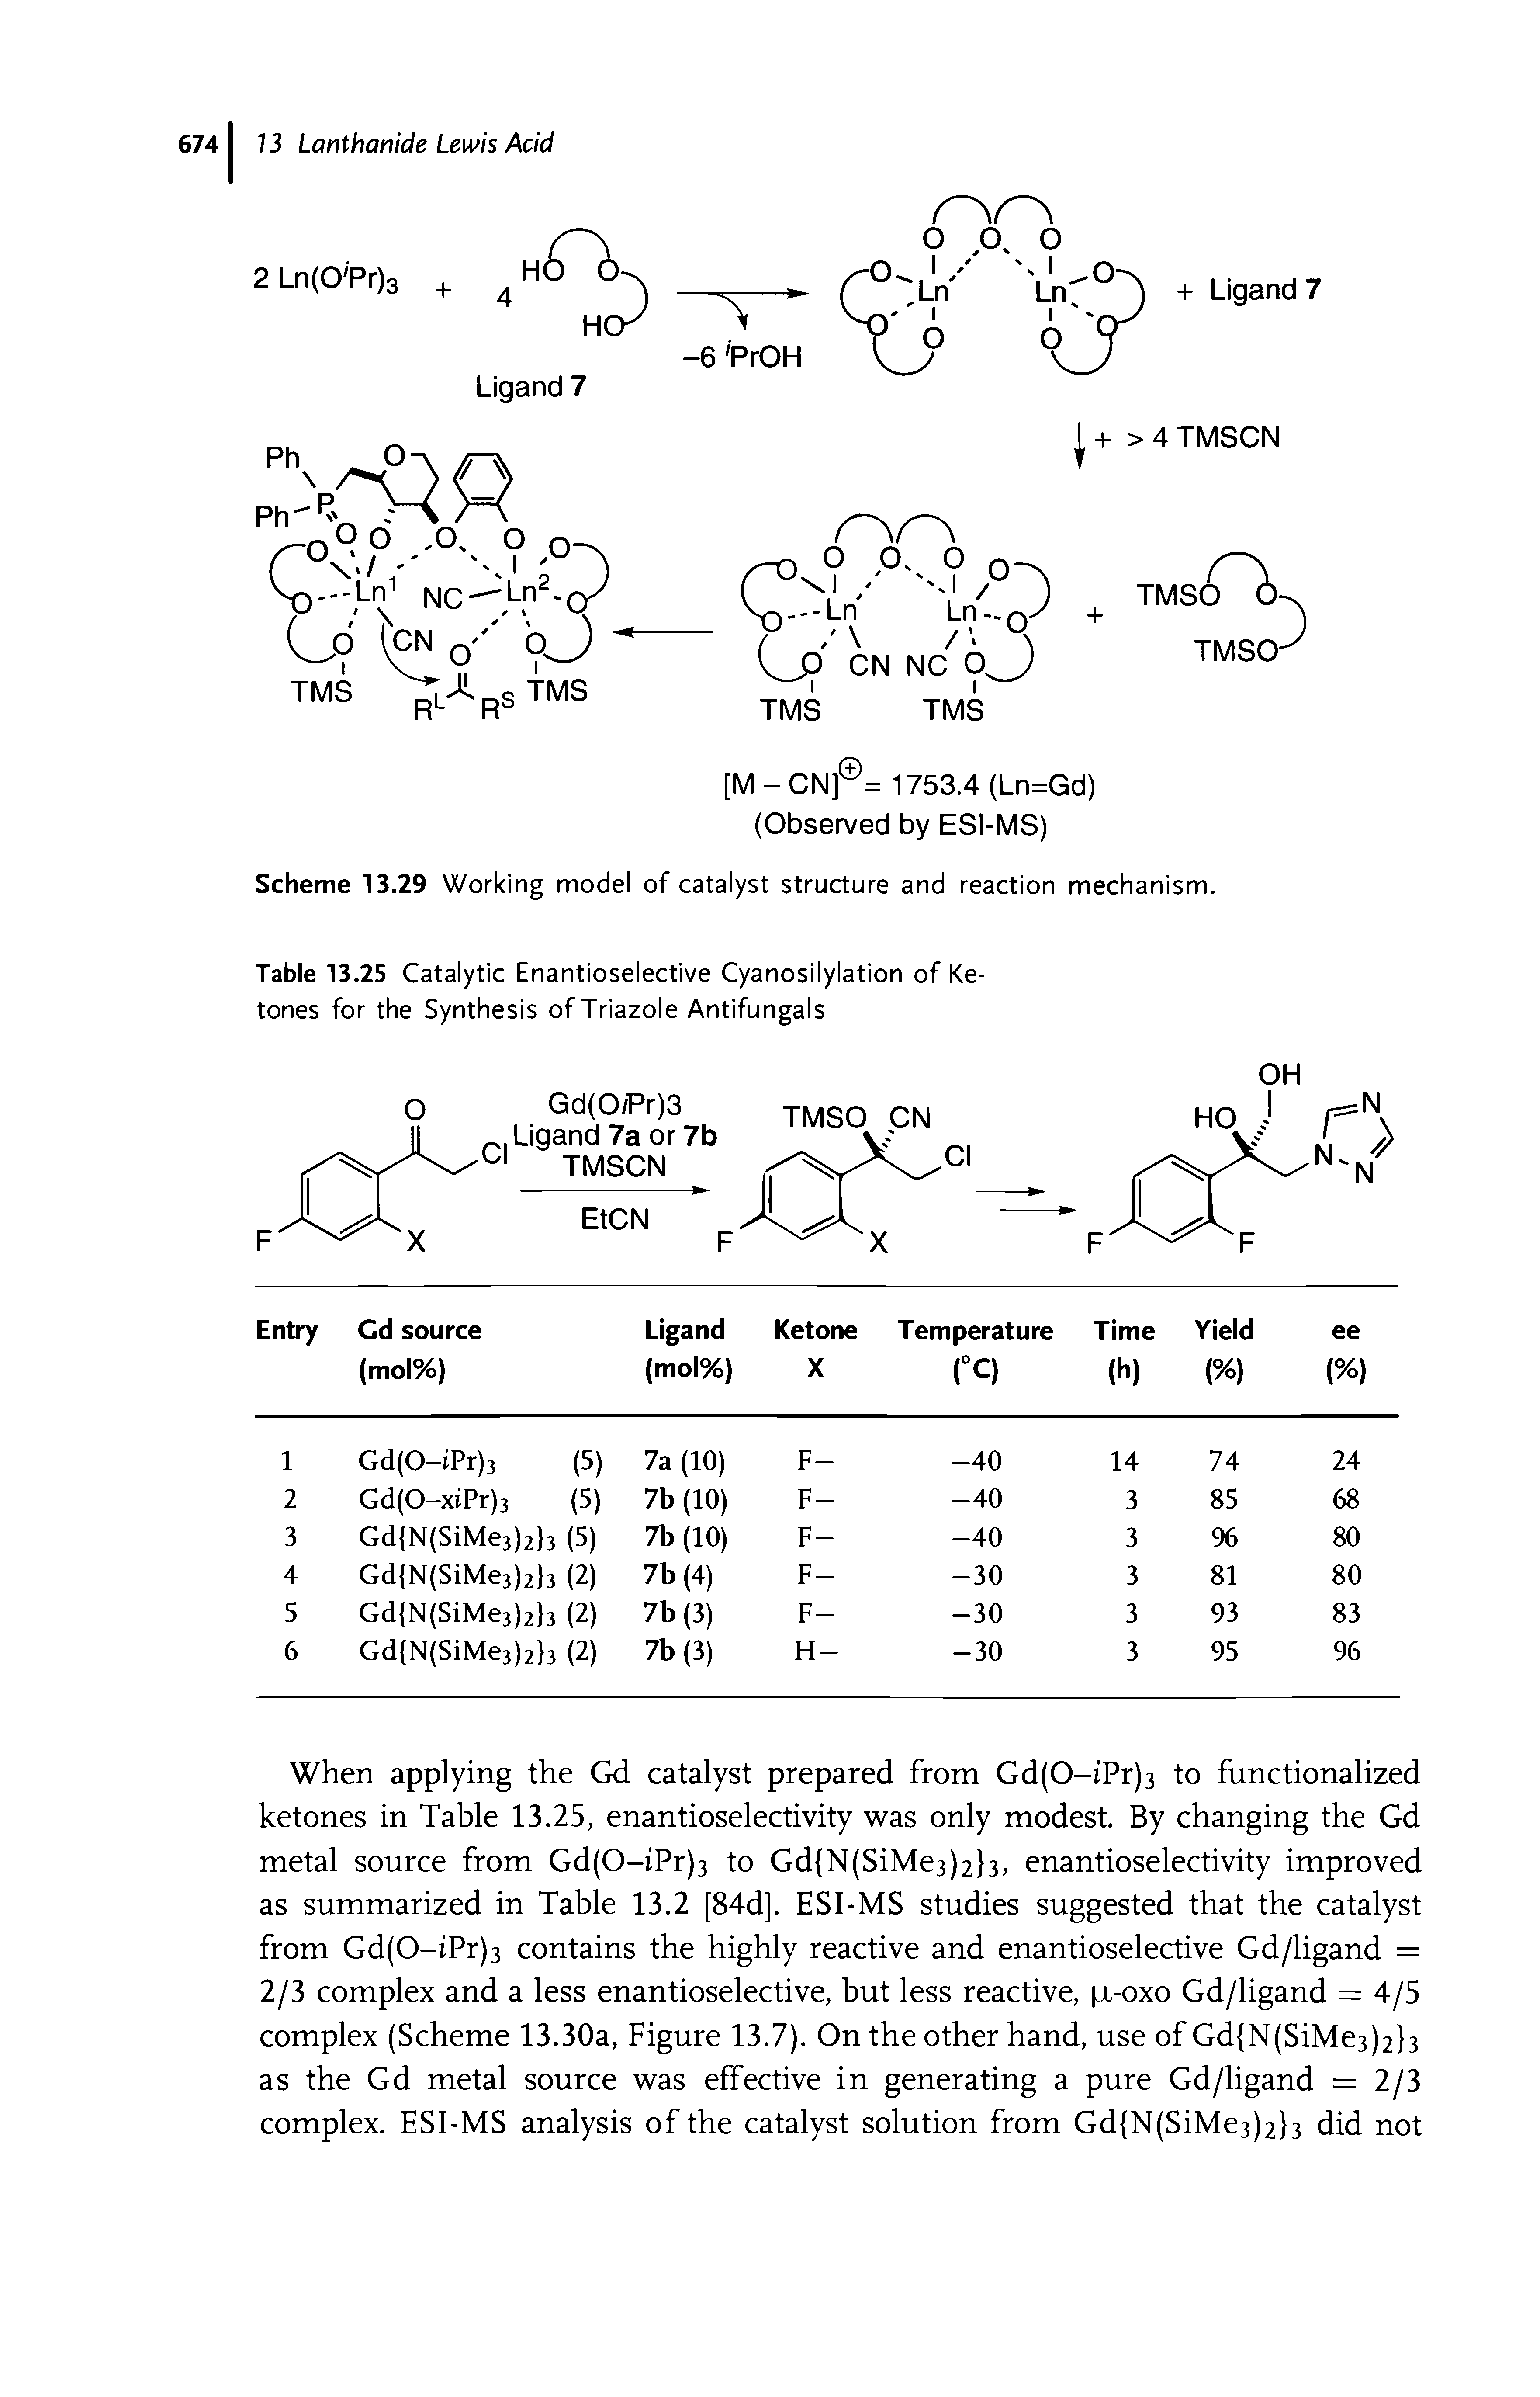 Table 13.25 Catalytic Enantioselective Cyanosilylation of Ketones for the Synthesis of Triazole Antifungals...